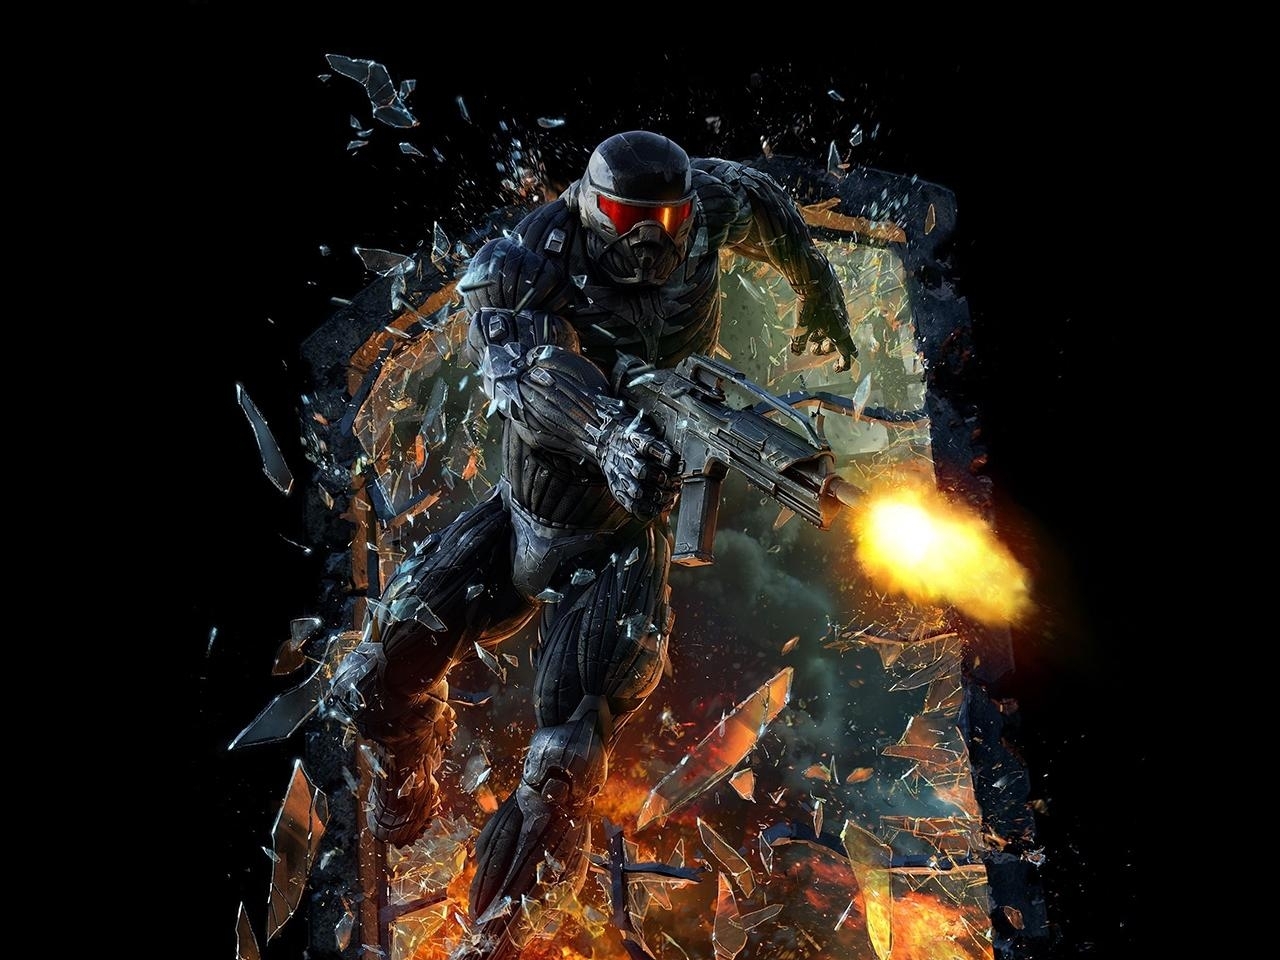 crysis, games wallpaper for mobile